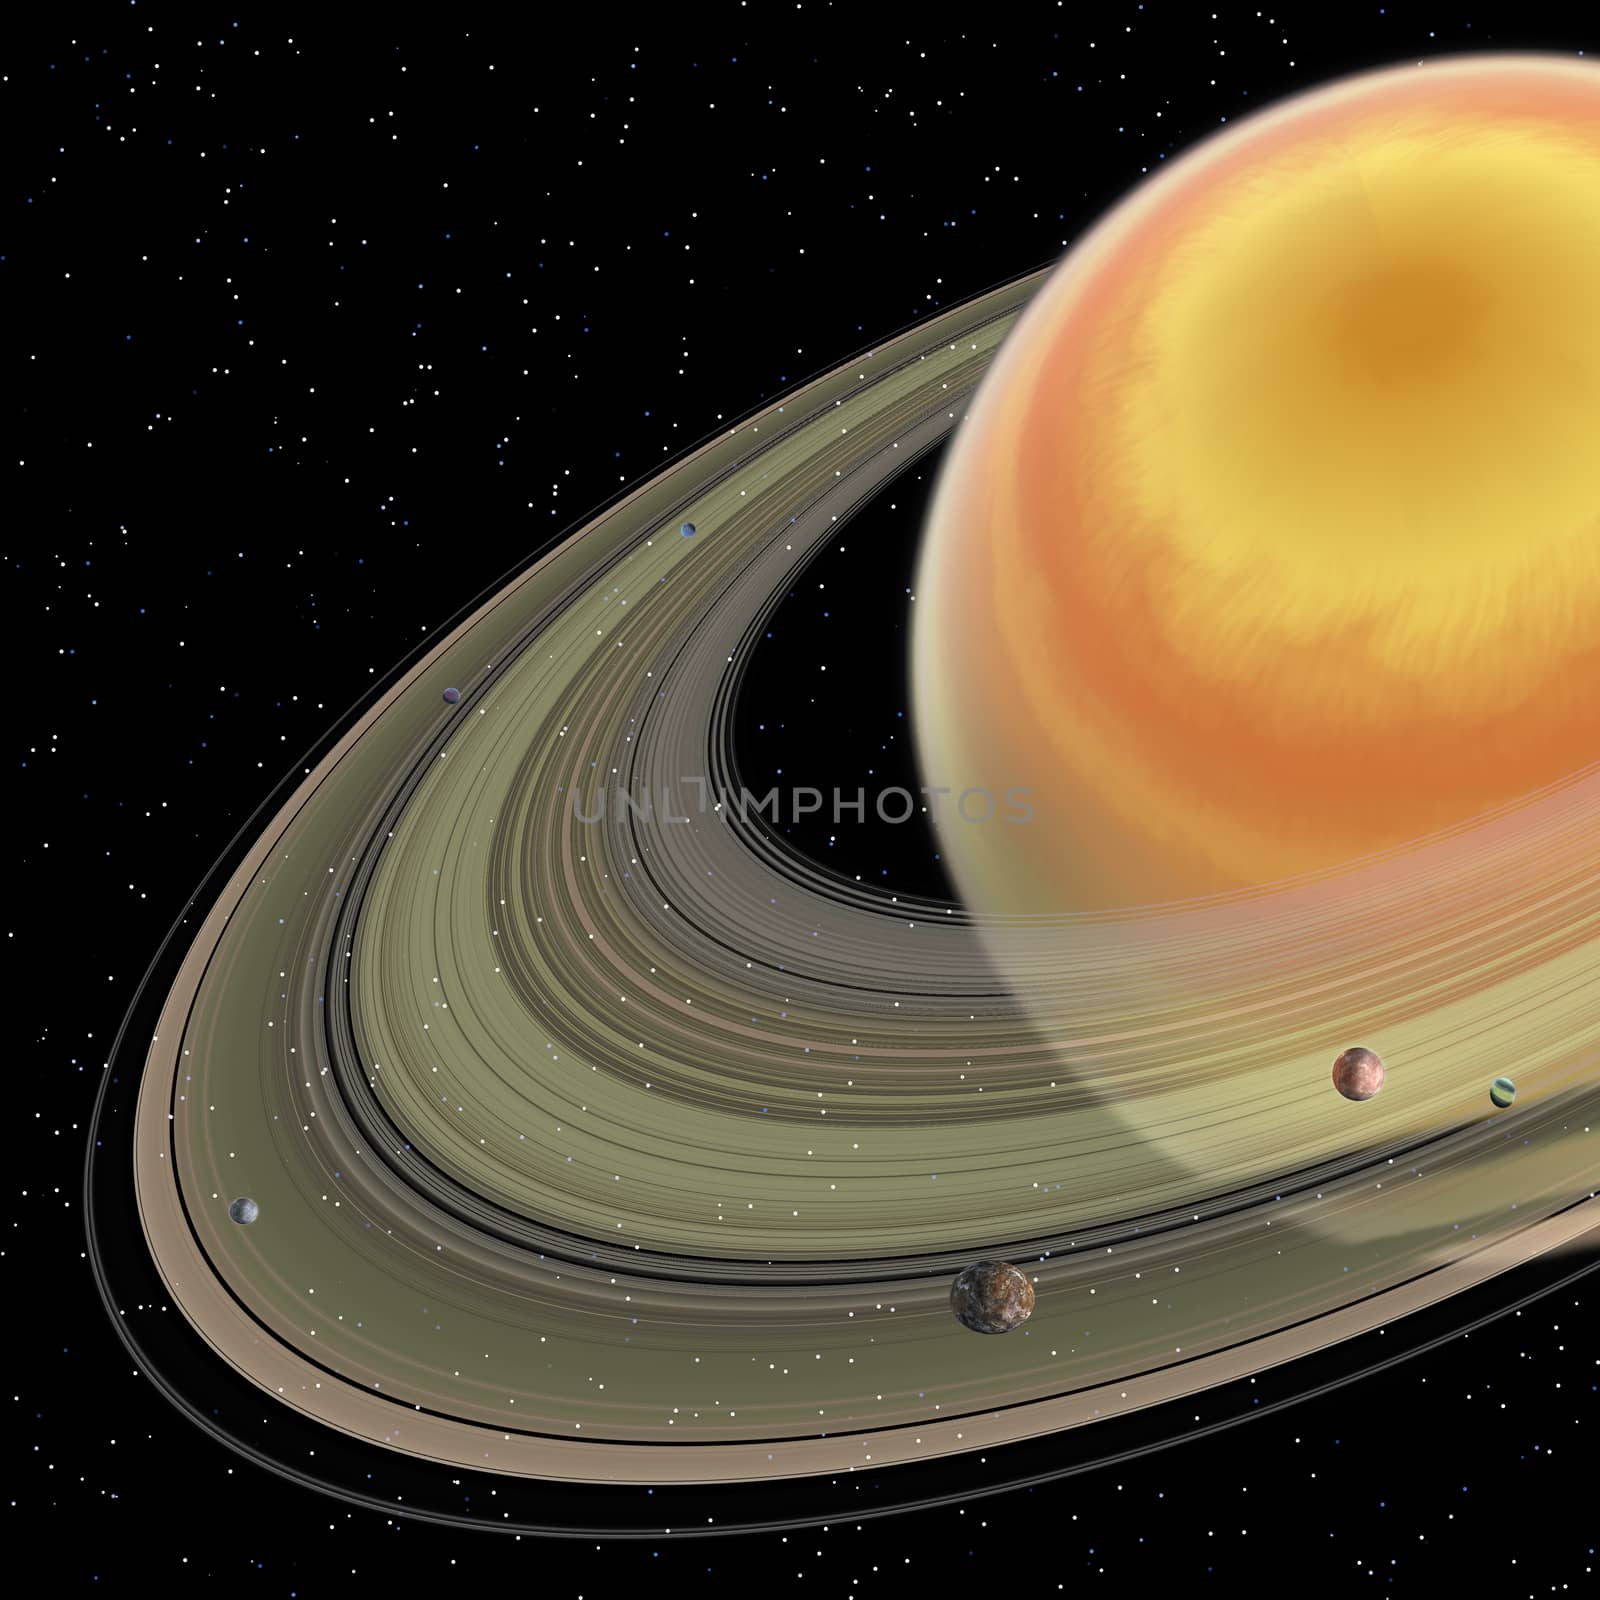 Saturn is the sixth planet in our solar system and has planetary rings with 150 moons.